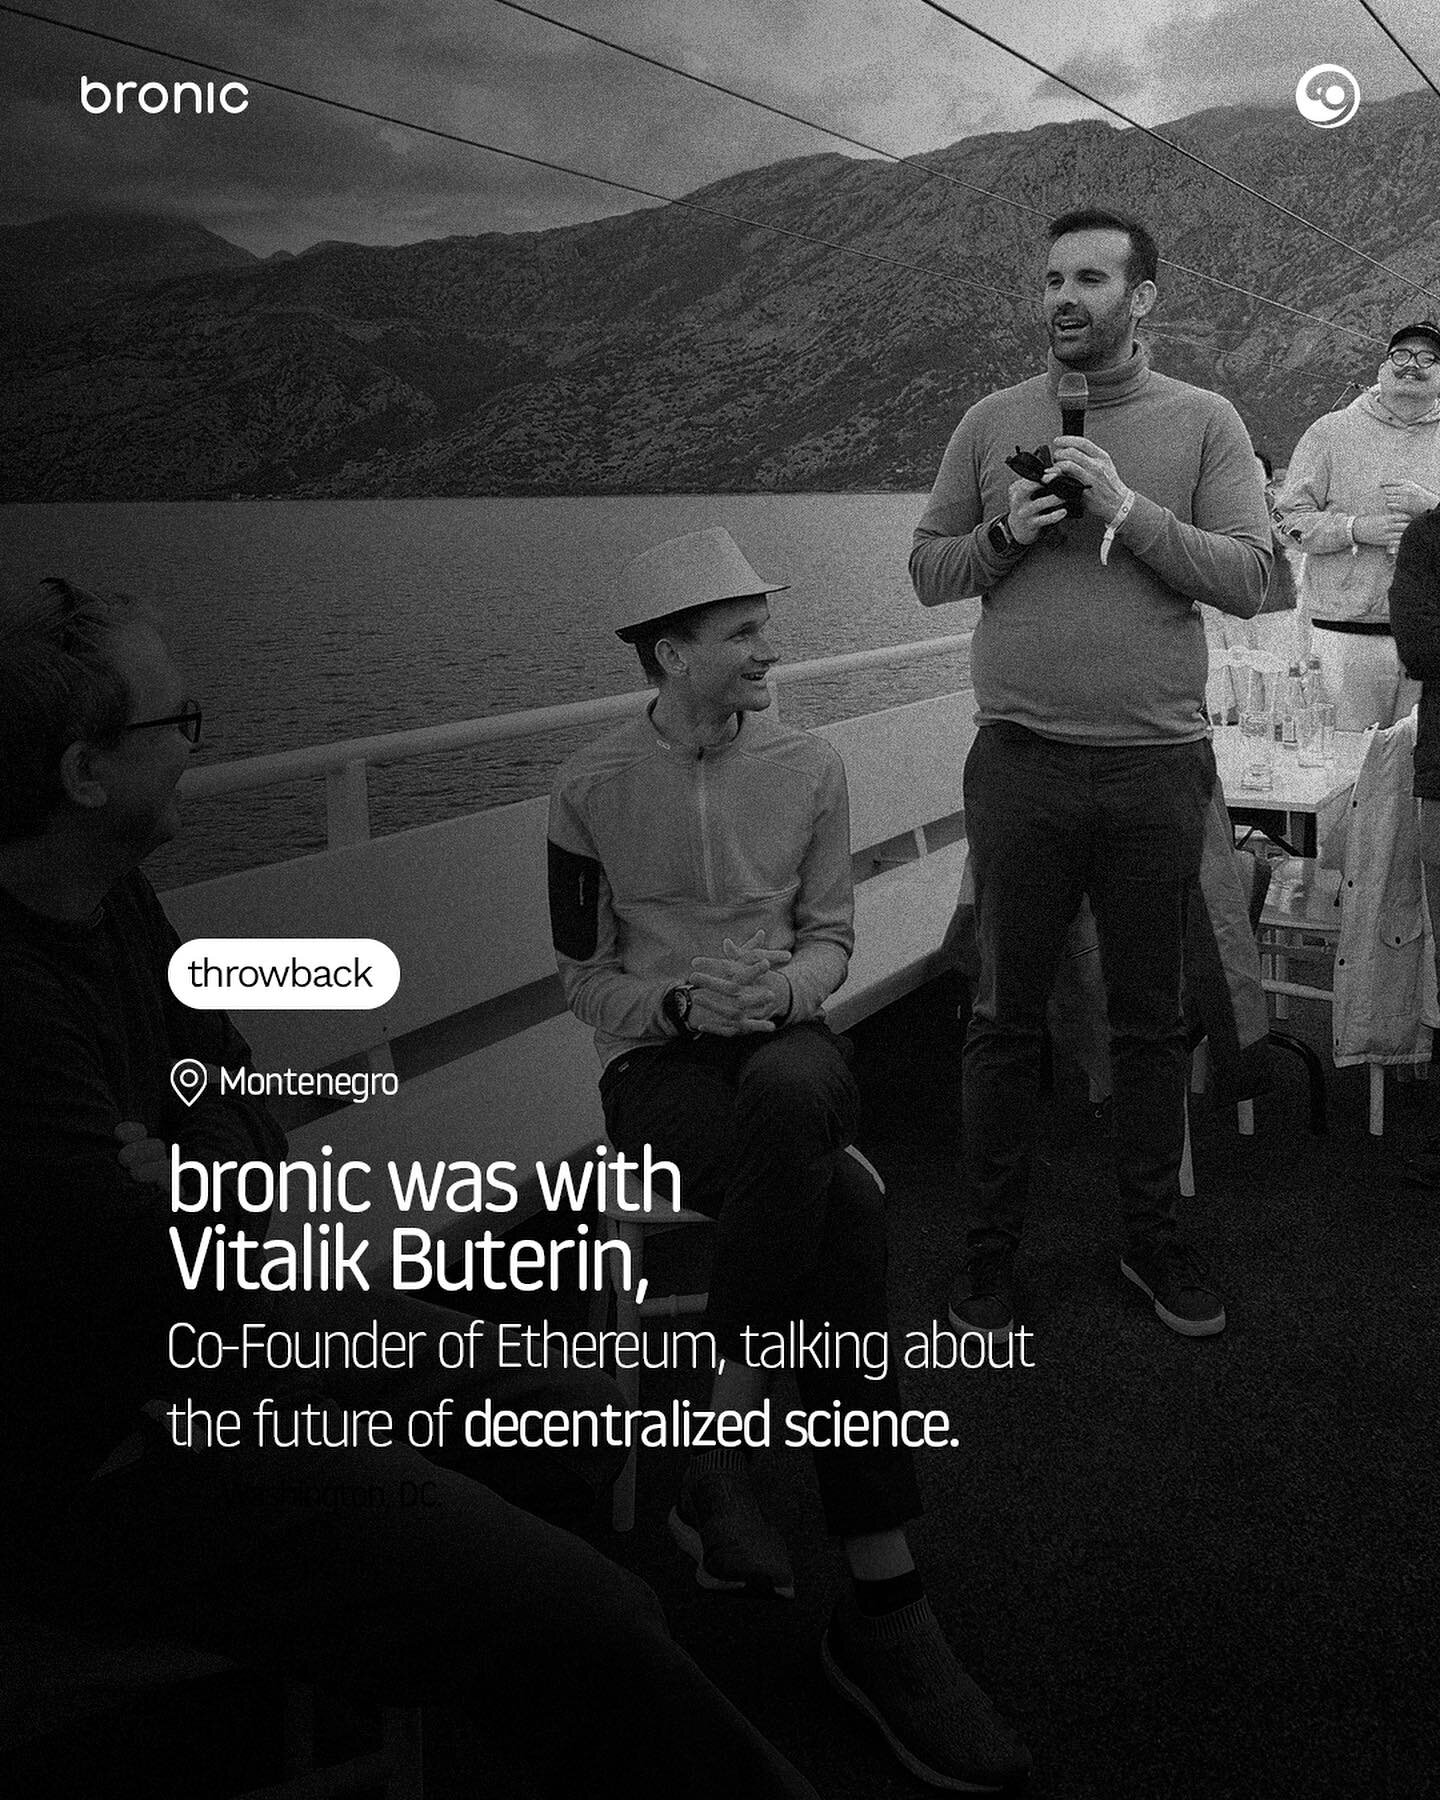 Throwback thursday! Bronic was with Vitalik Buterin 

⏰ It's time to talk about decentralized science and how biosecurity has a place. Find out more about what we do at bronic.co 🔗

#biosecurity #biohacking #biohack #science #biology